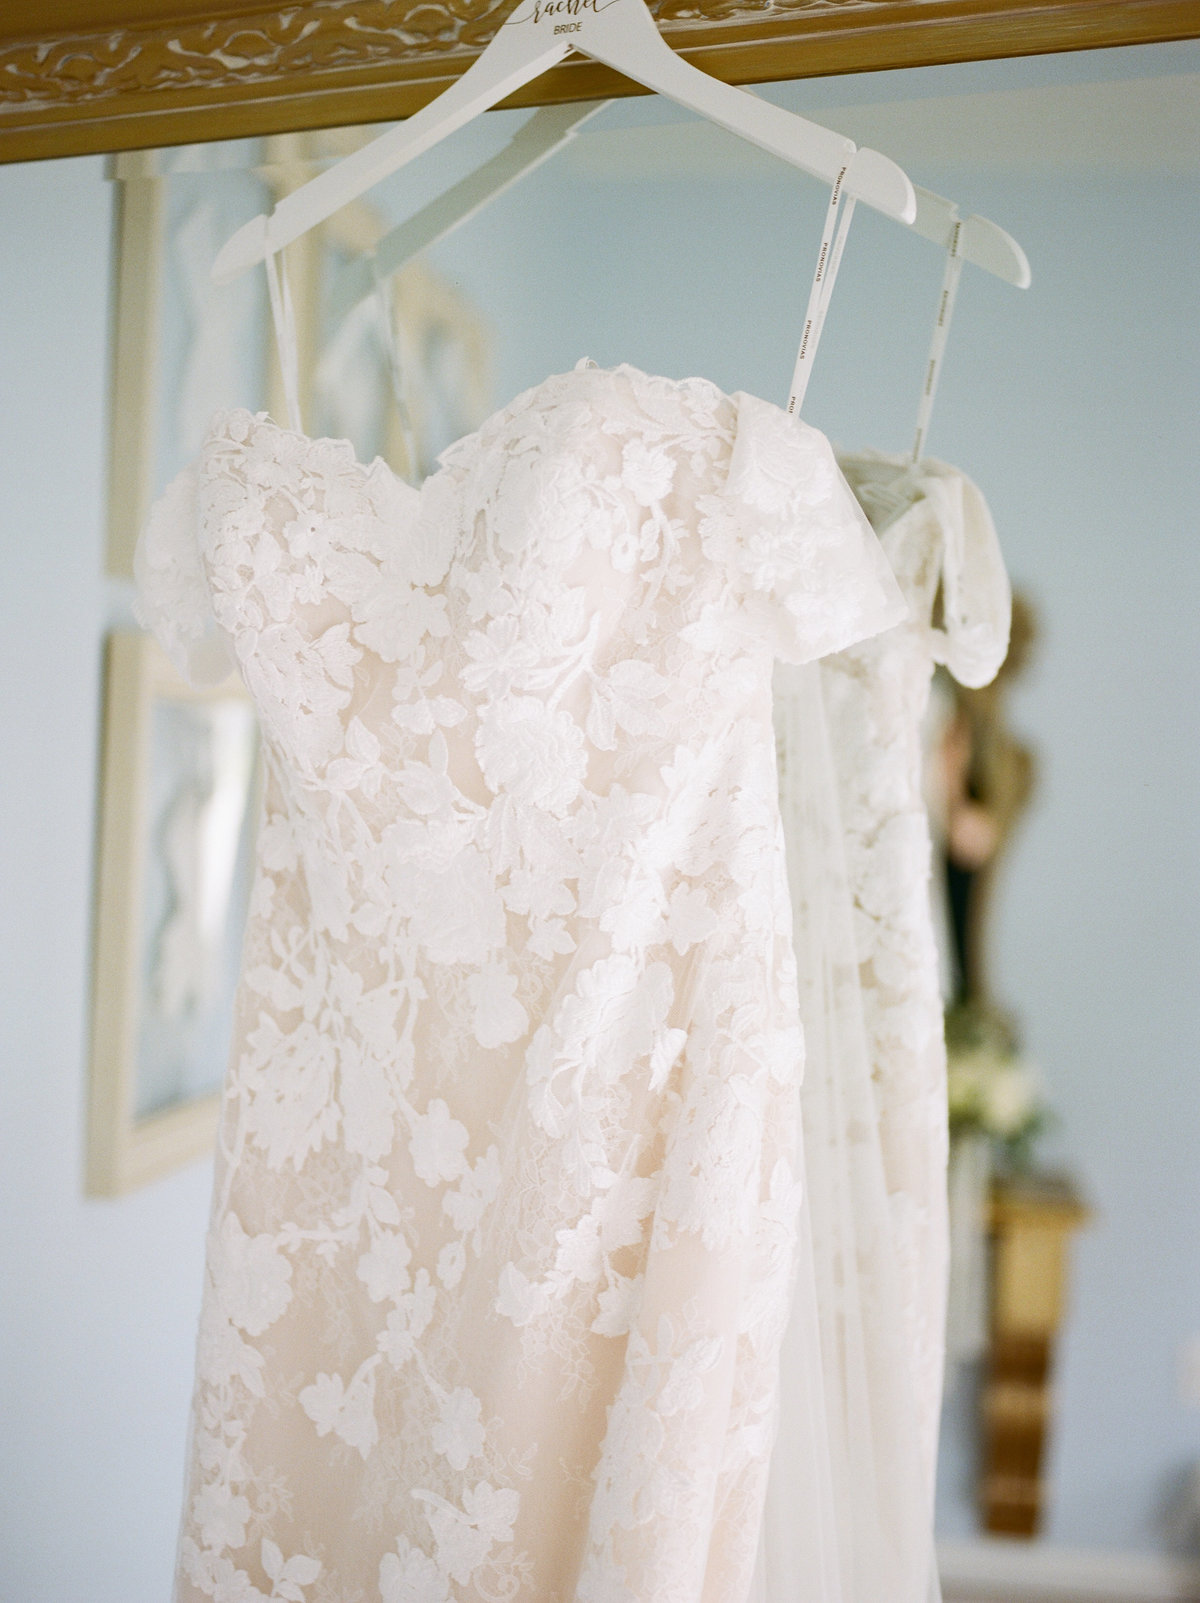 lace strapless wedding gown hanging on mirror